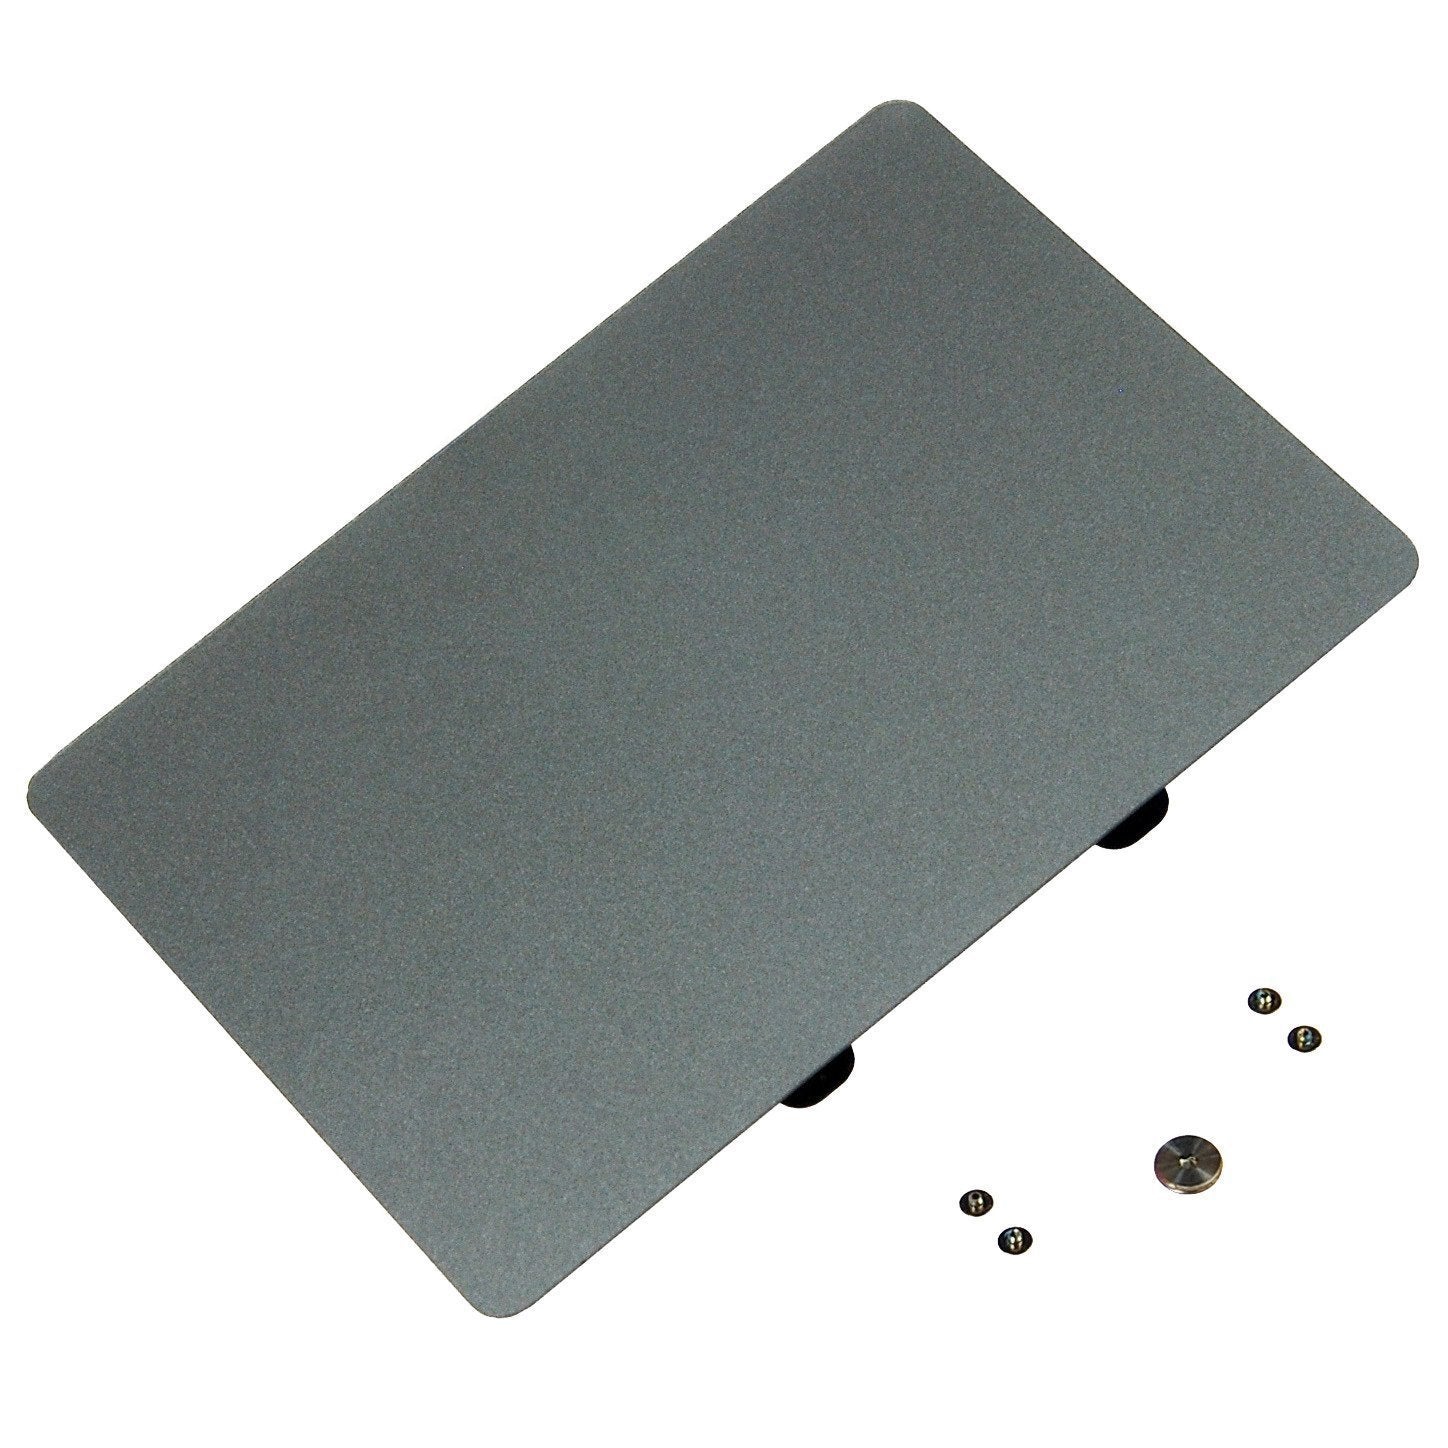 MacBook Pro 13" Unibody (Mid 2009-Mid 2012) Trackpad New With Screws Without Cable